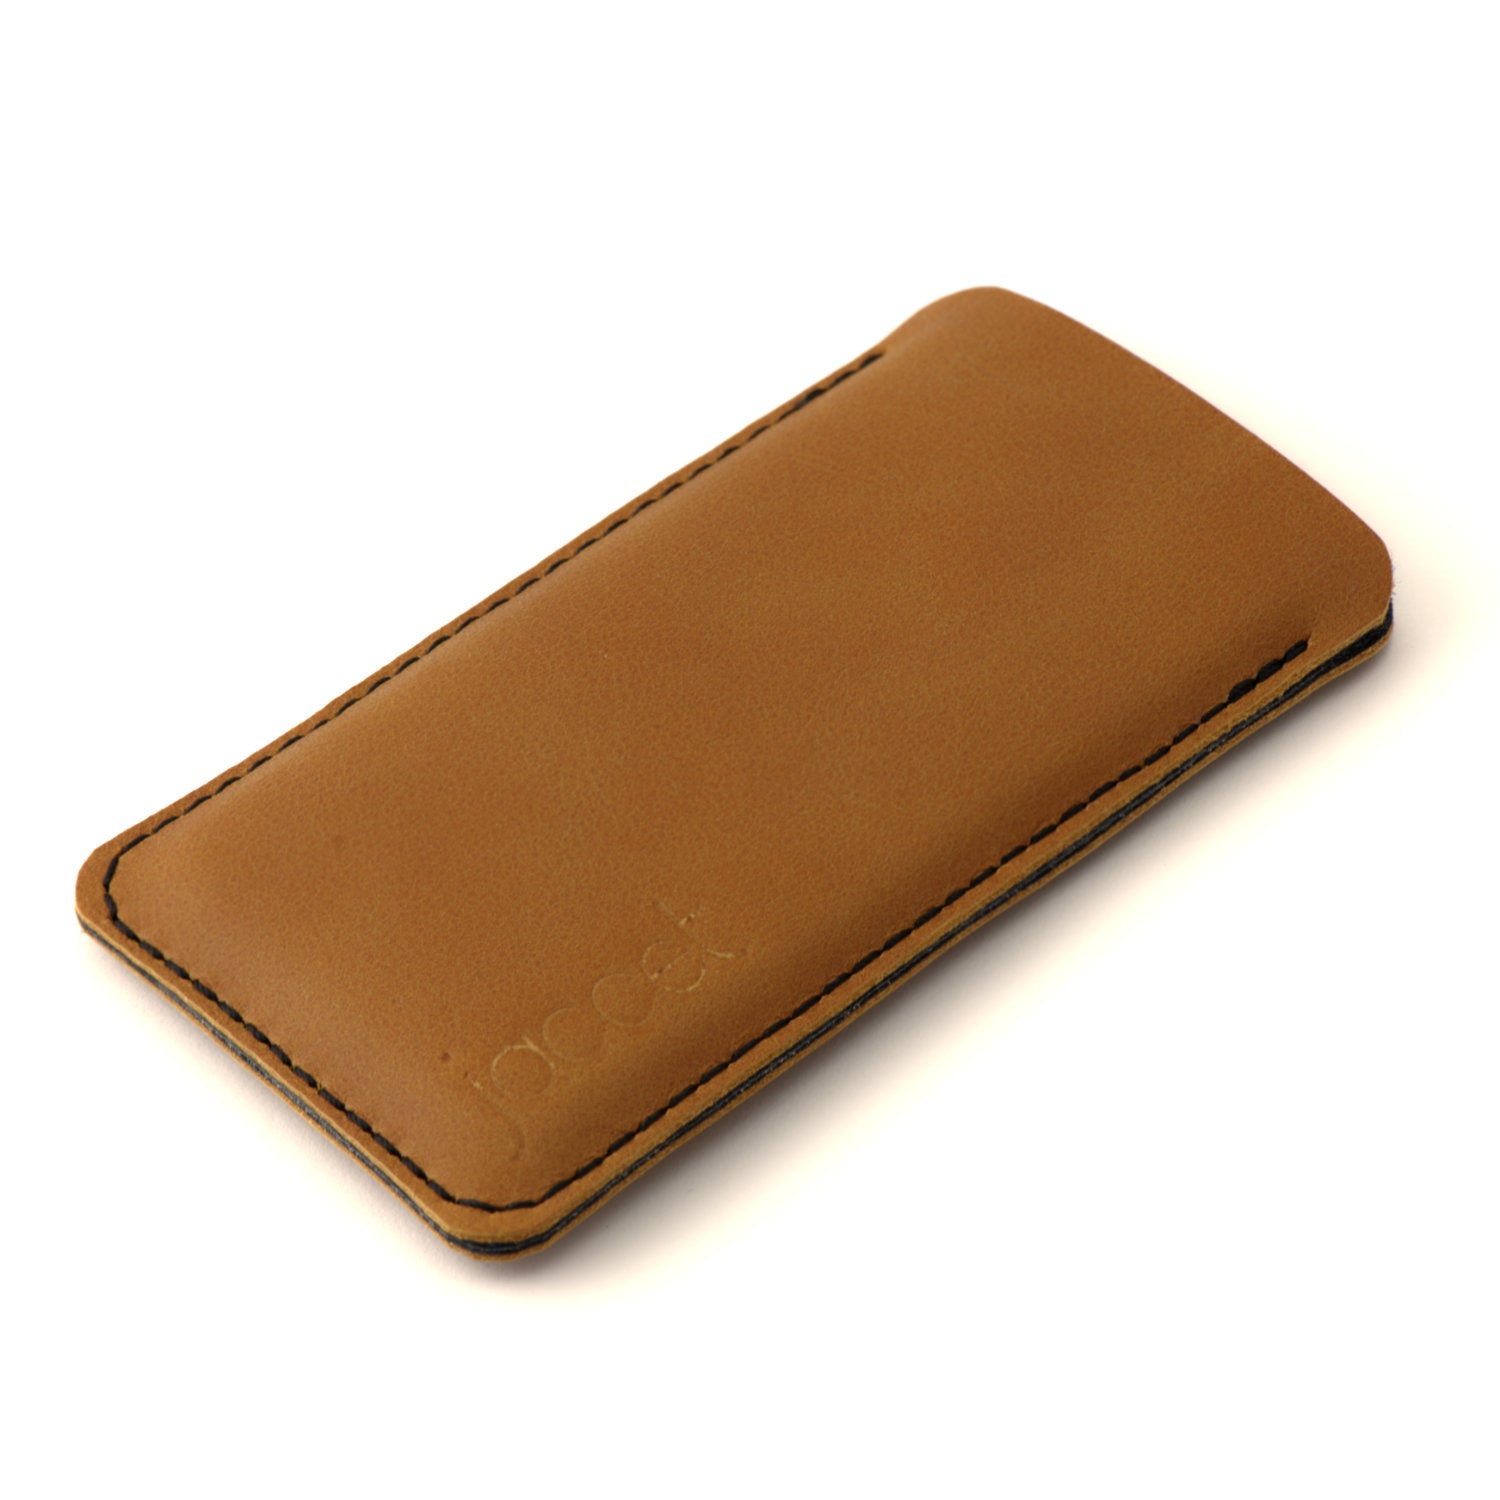 JACCET leather OPPO sleeve - Cognac color leather with black wool felt - 100% Handmade